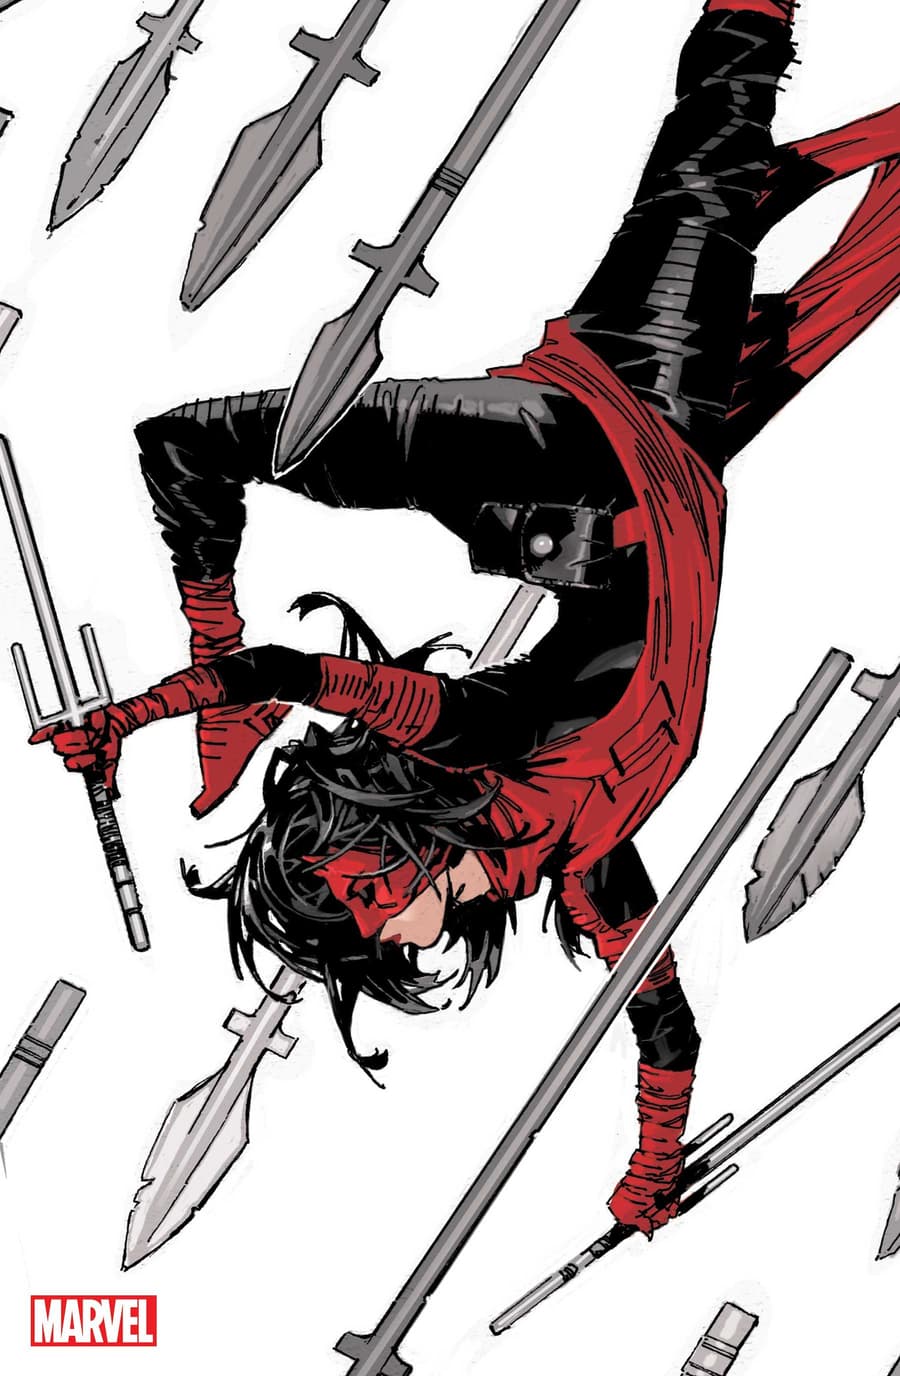 DAREDEVIL: WOMAN WITHOUT FEAR #2 Cover by CHRIS BACHALO